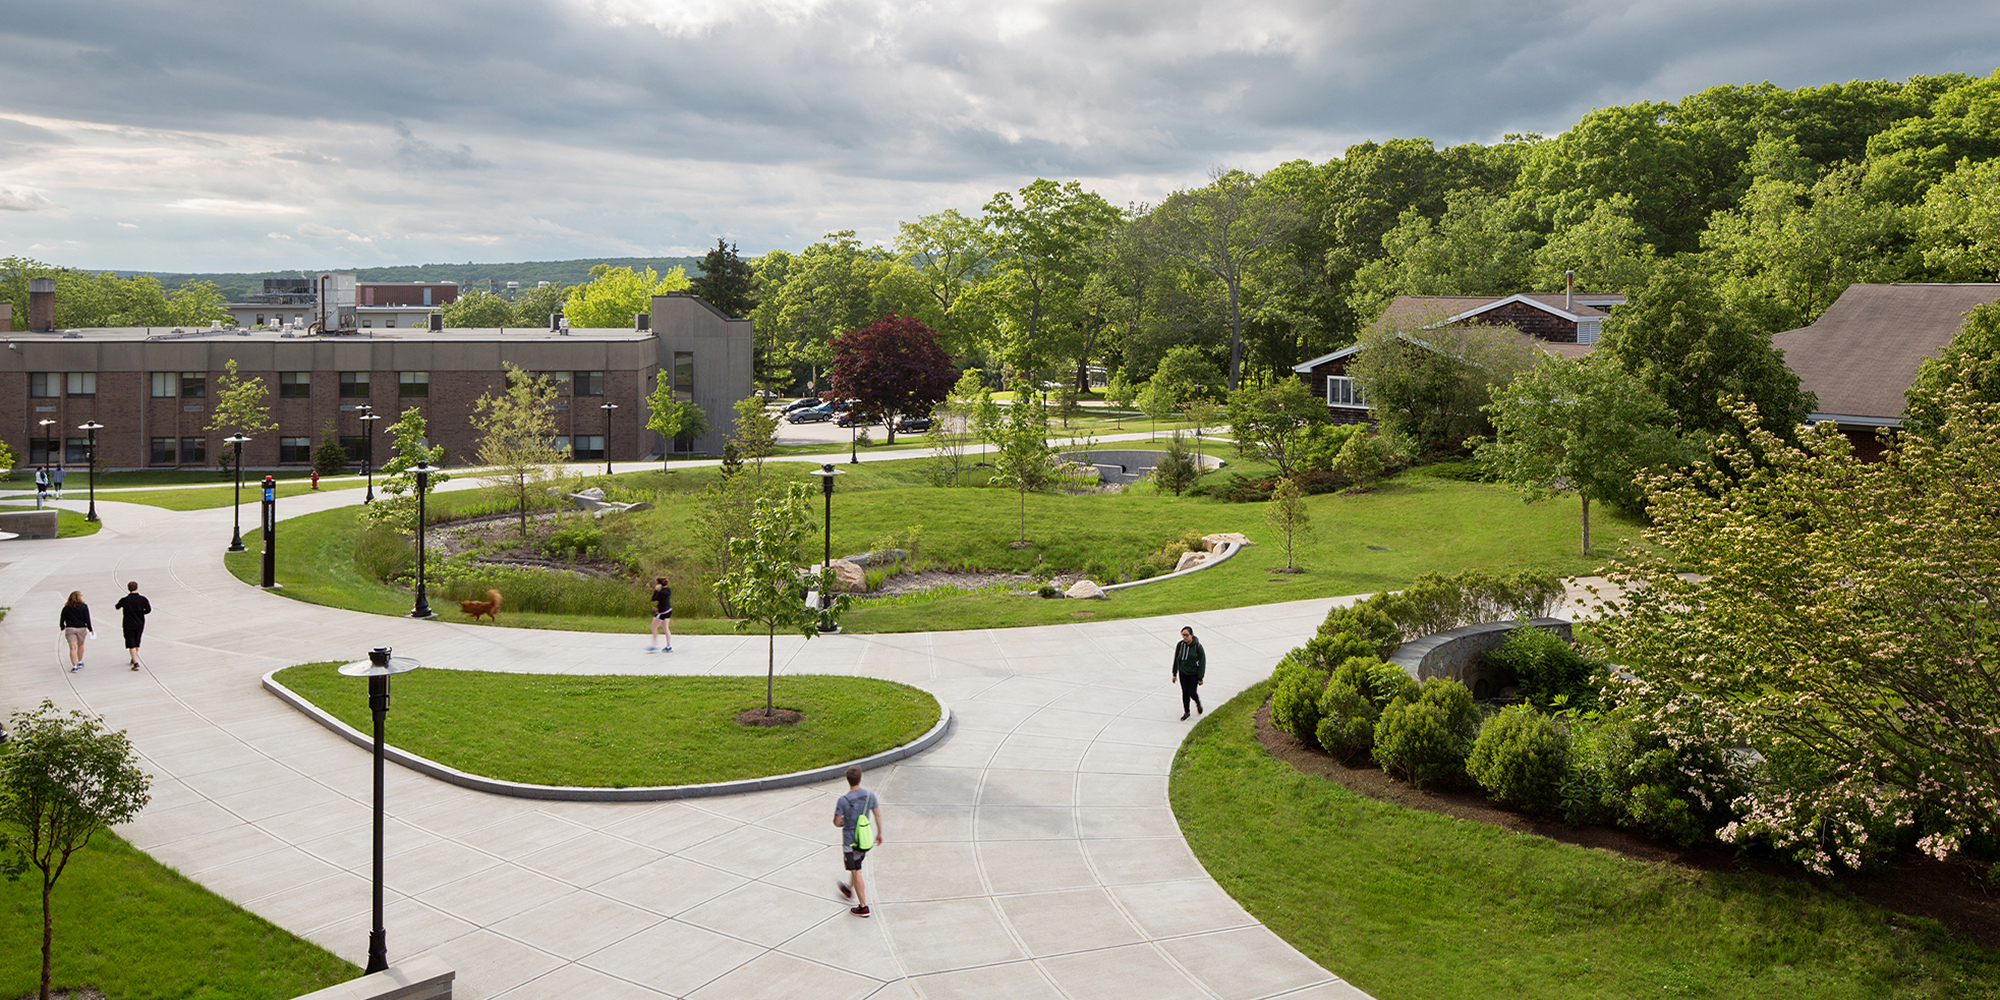 Walkways and open space design as part of the North District Plan at the University of Rhode Island (URI) campus